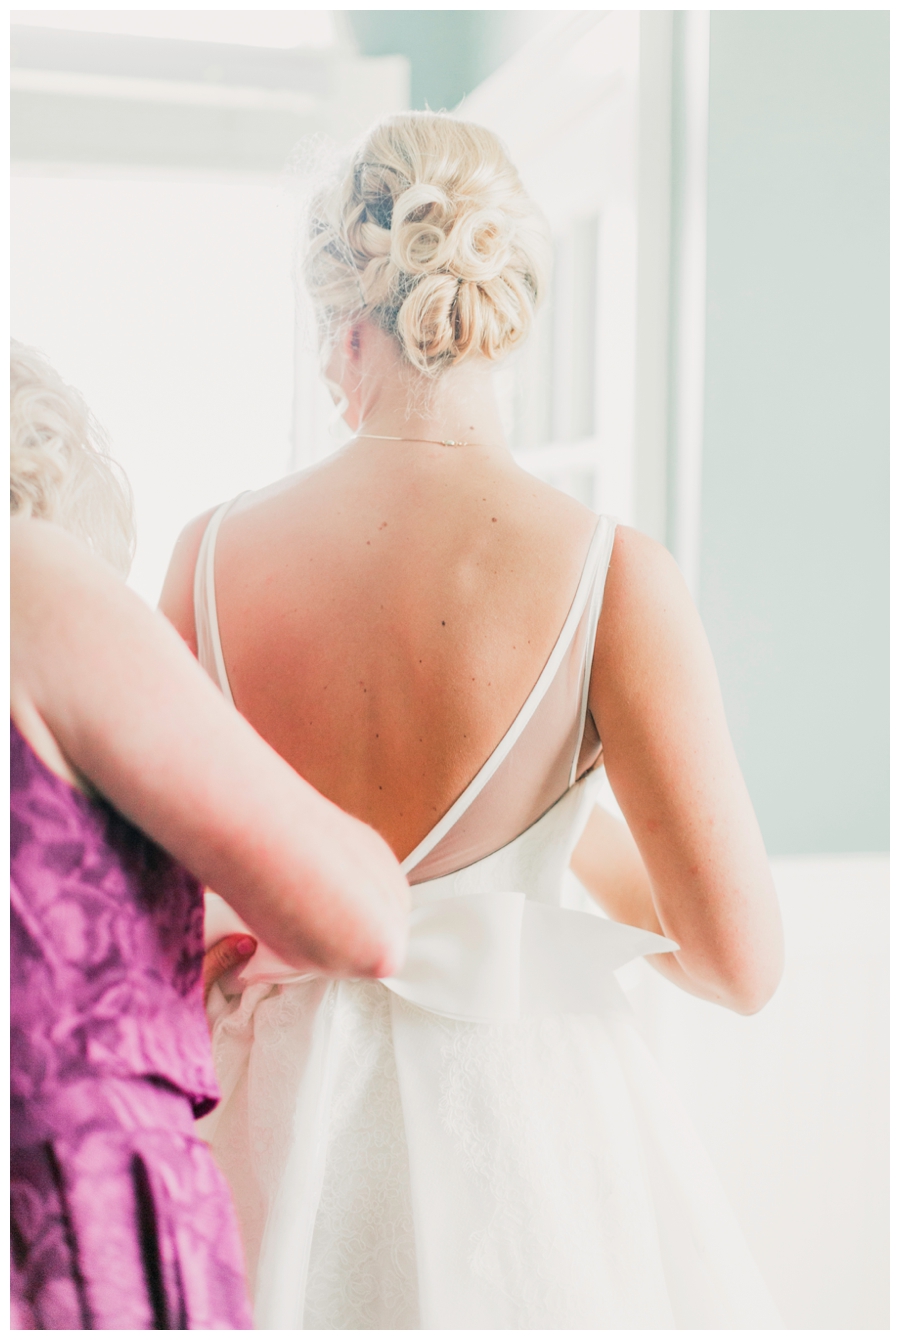 Light and Airy Photos of the bride in front of a window_0014.jpg